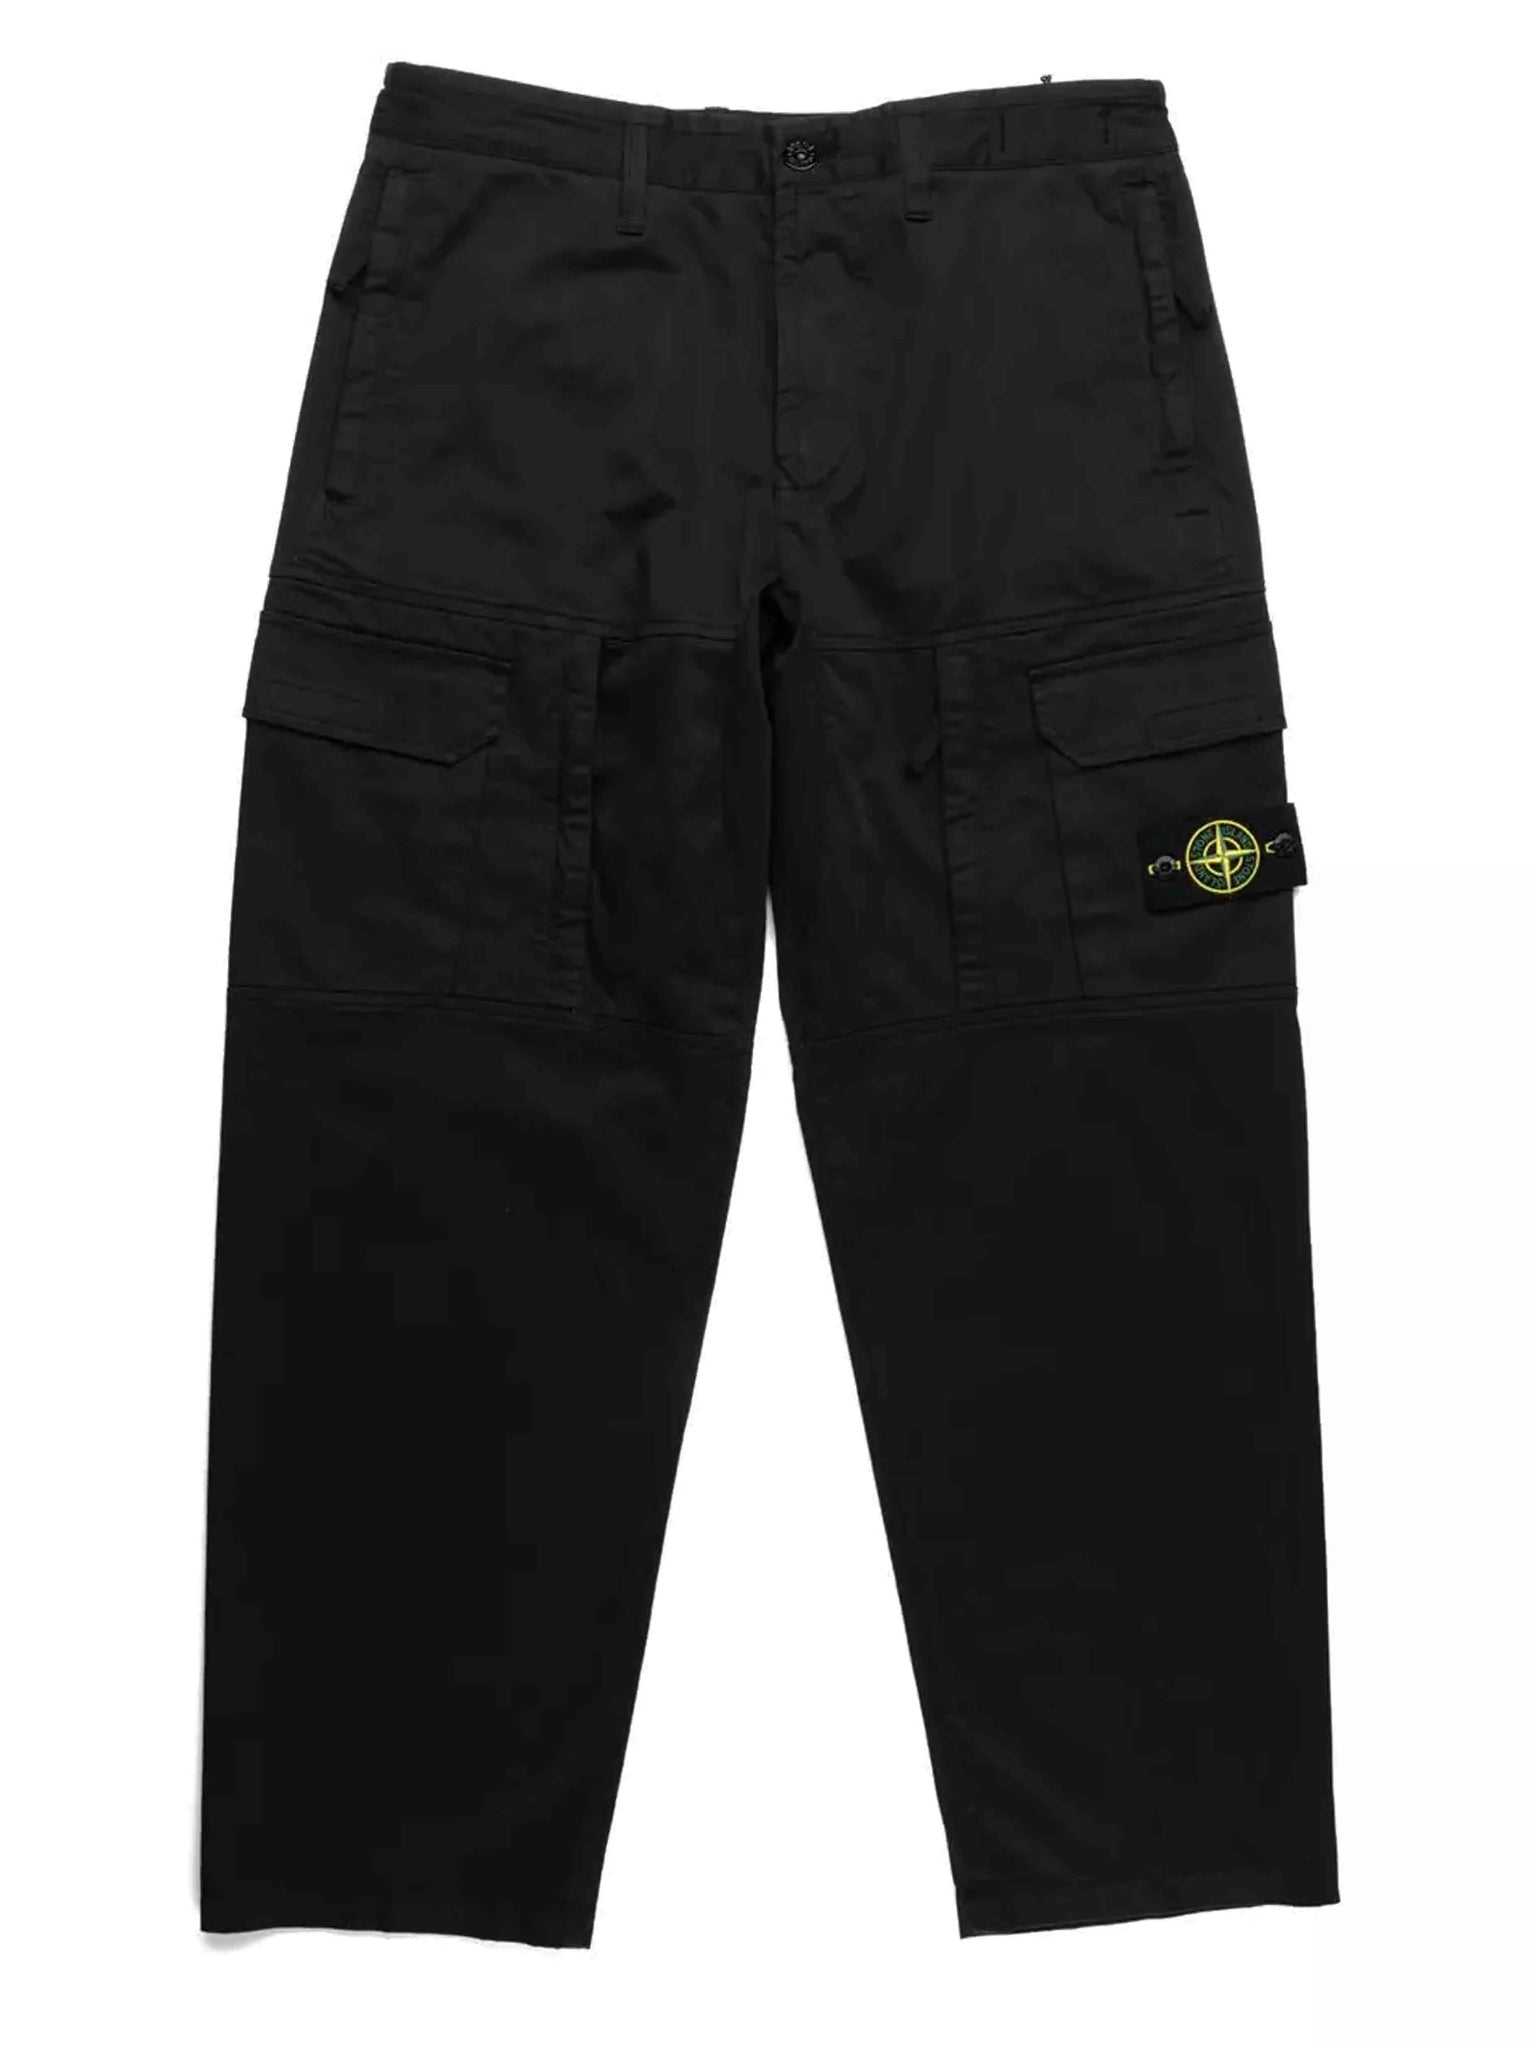 Stone Island Stretch Cotton Wool Relaxed Fit Cargo Pant Black Prior